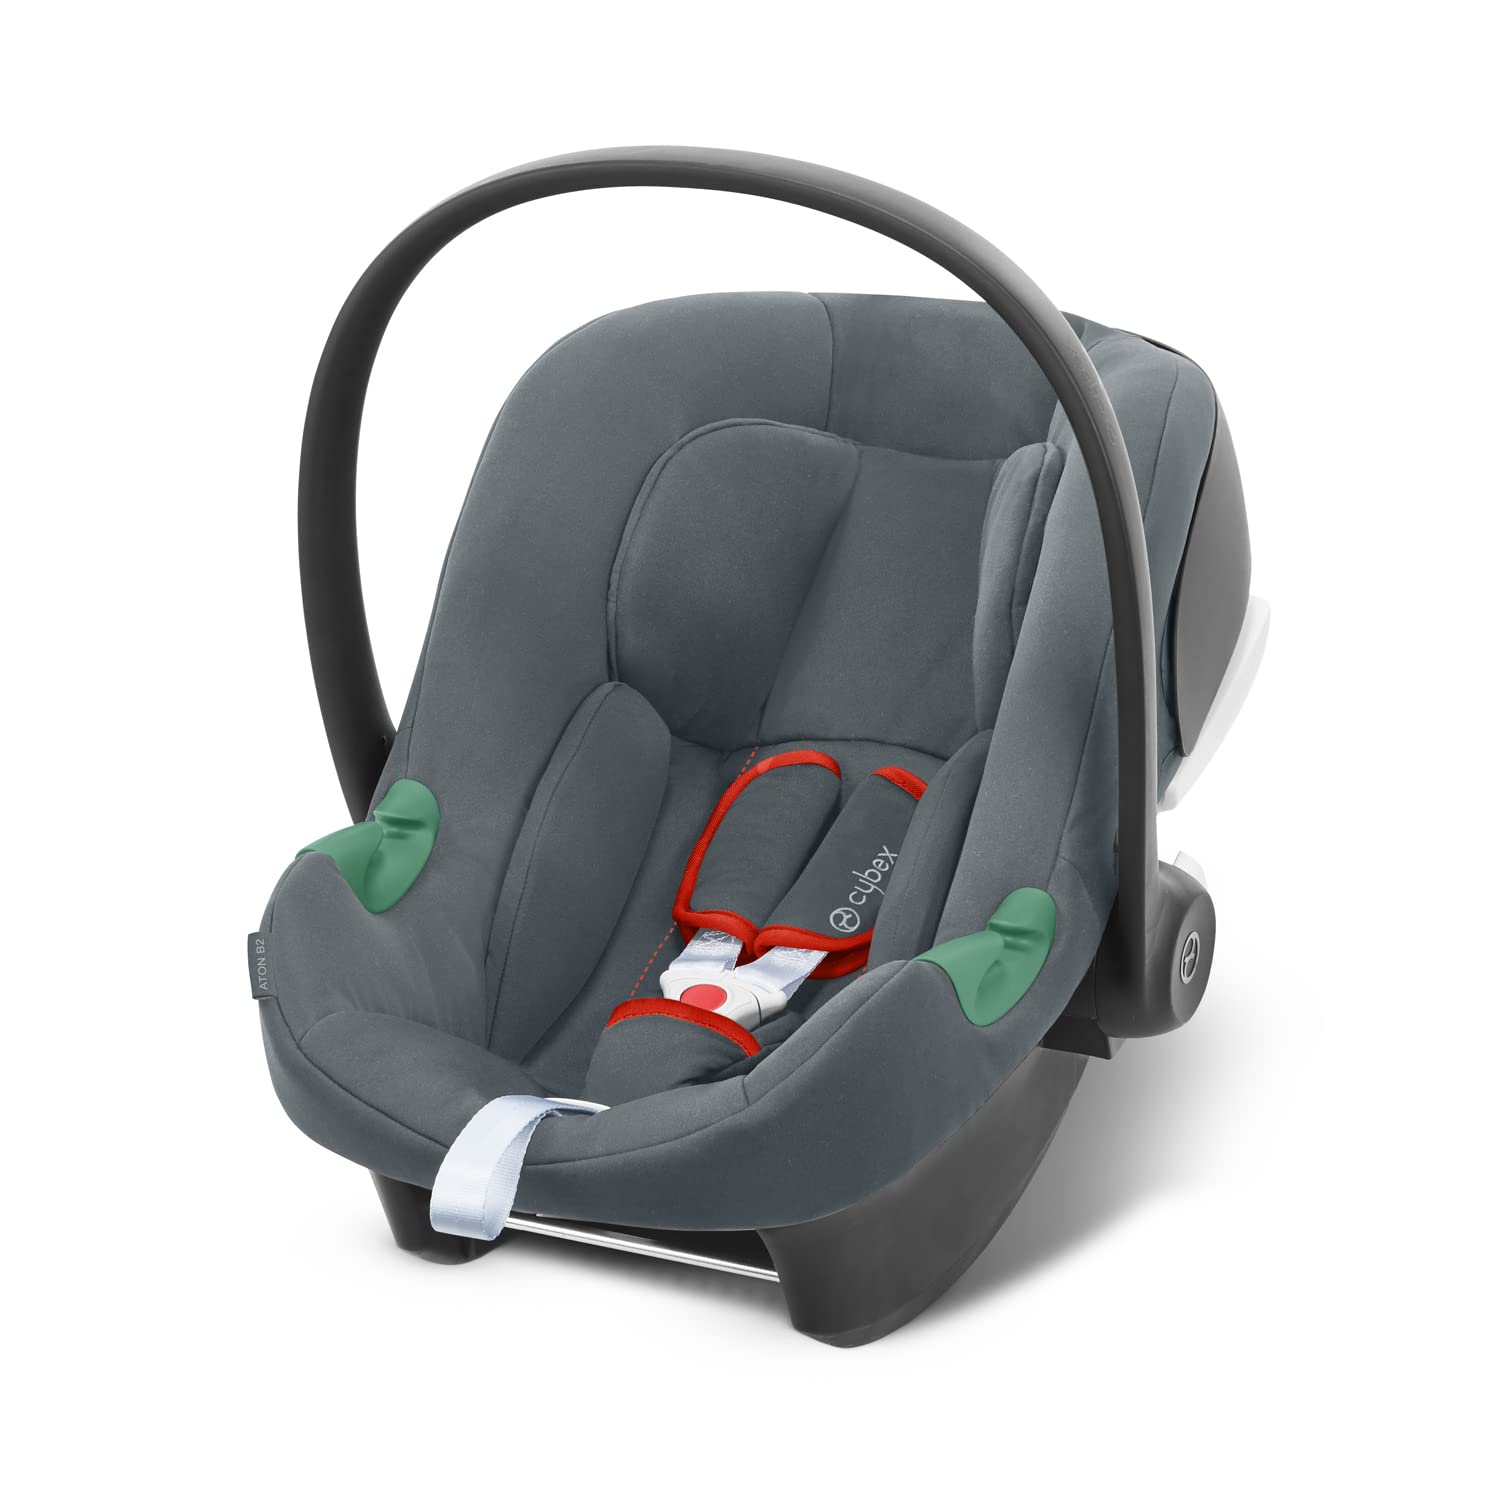 CYBEX Aton B2 i-Size Car Seat from Birth to Approx. 24 Months, Max. 13 kg, Includes Newborn Insert, SensorSafe Compatible, Steel Grey